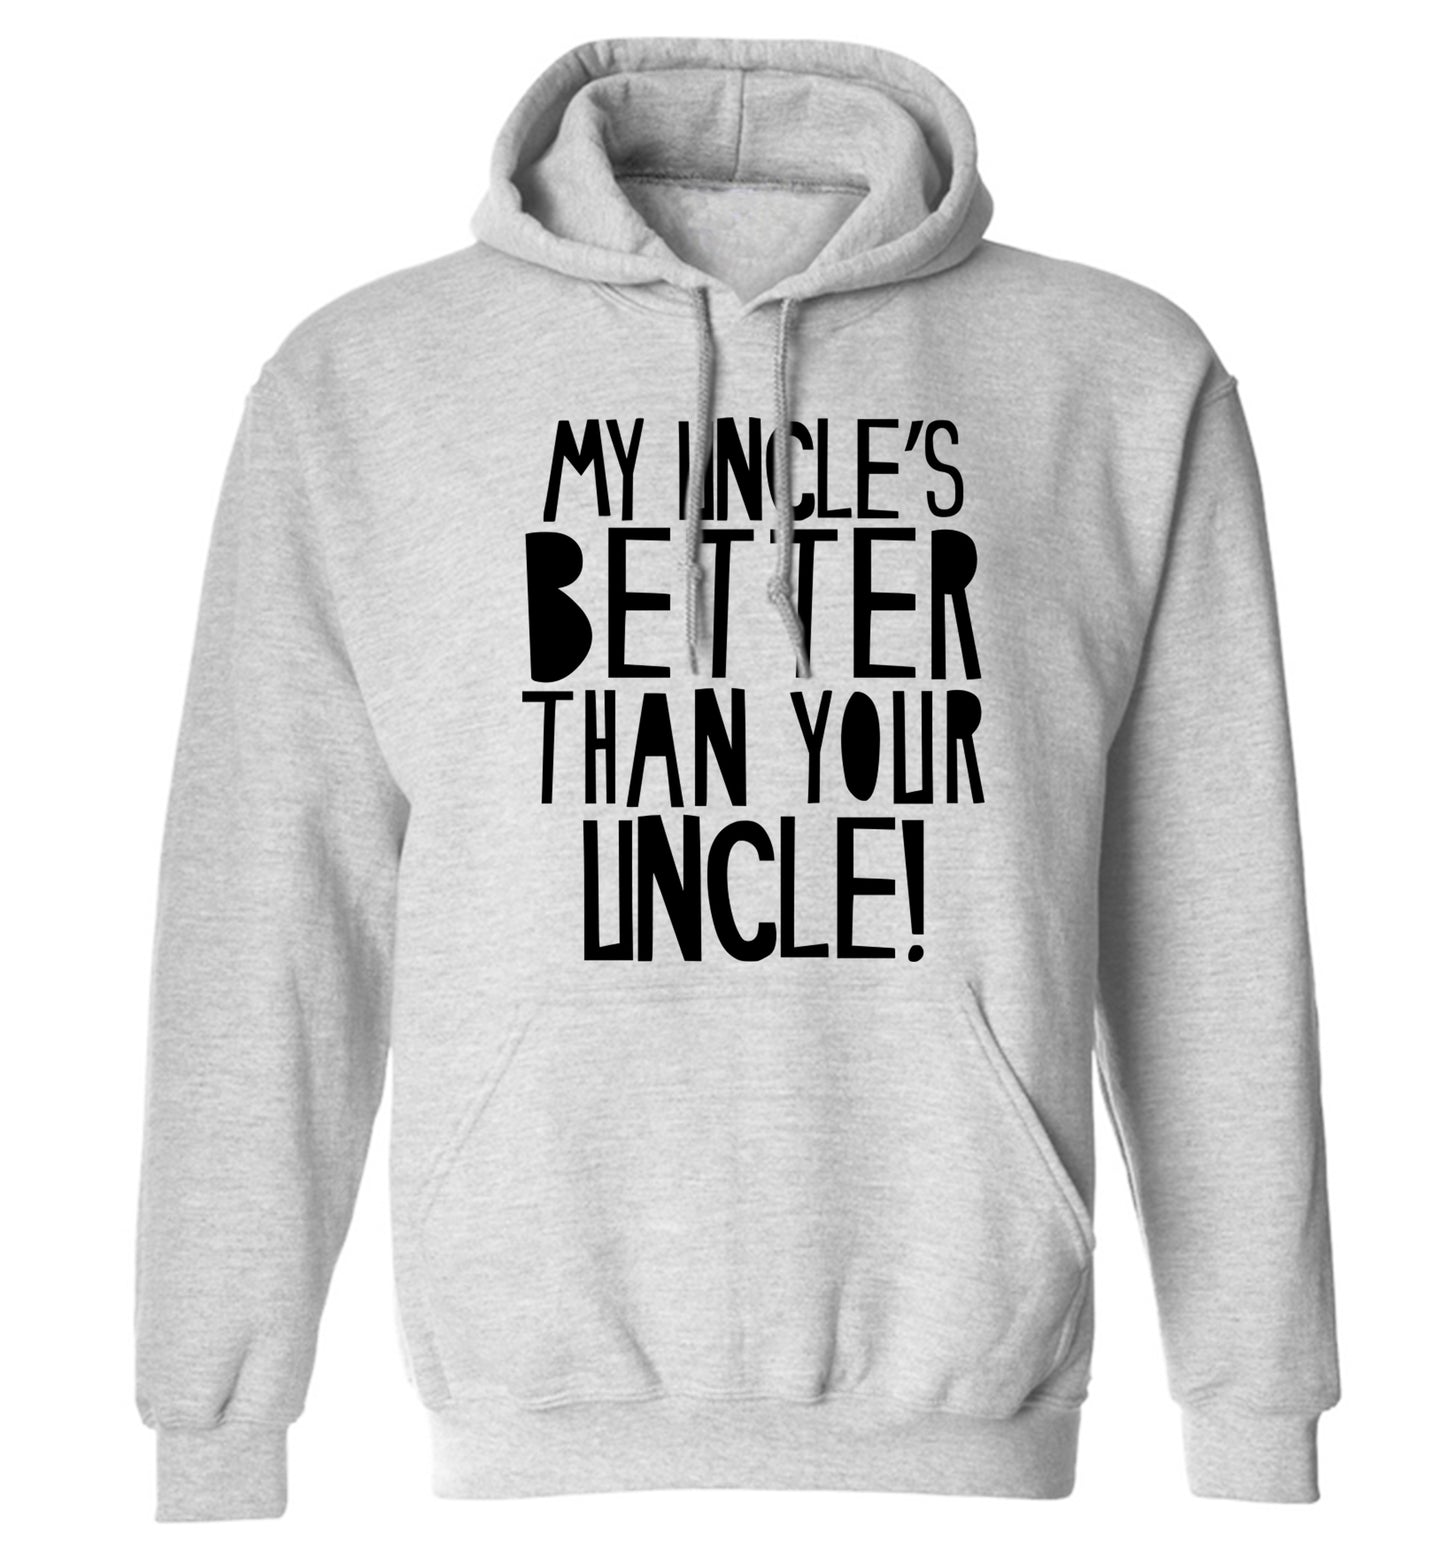 My uncles better than your uncle adults unisex grey hoodie 2XL